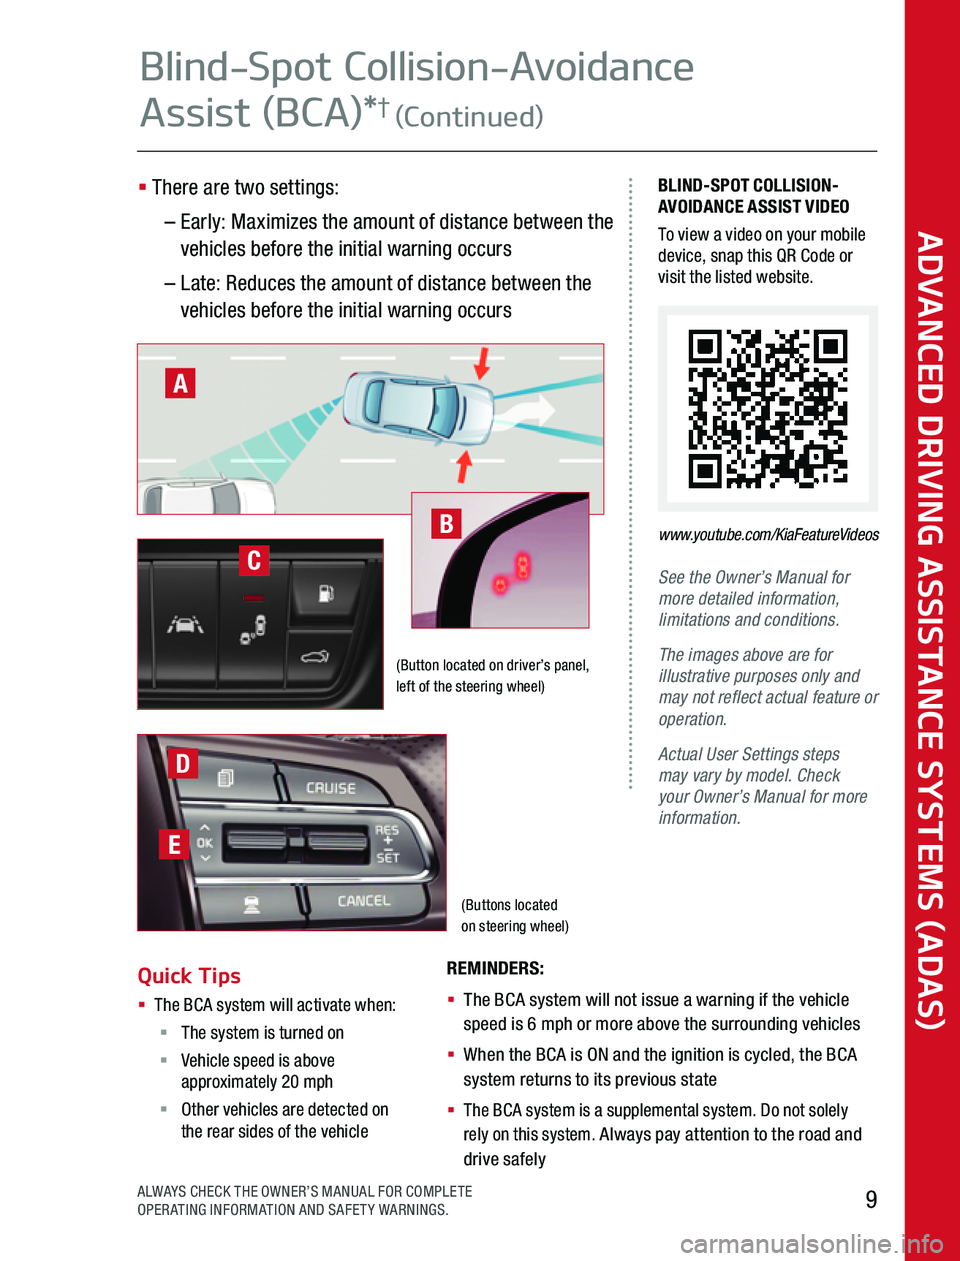 KIA K900 2020  Advanced Driving Assistance System (Buttons located  on steering wheel)
BLIND-SPOT COLLISION-AVOIDANCE ASSIST VIDEOTo view a video on your mobile device, snap this QR Code or visit the listed website  
See the Owner’s Manual for more